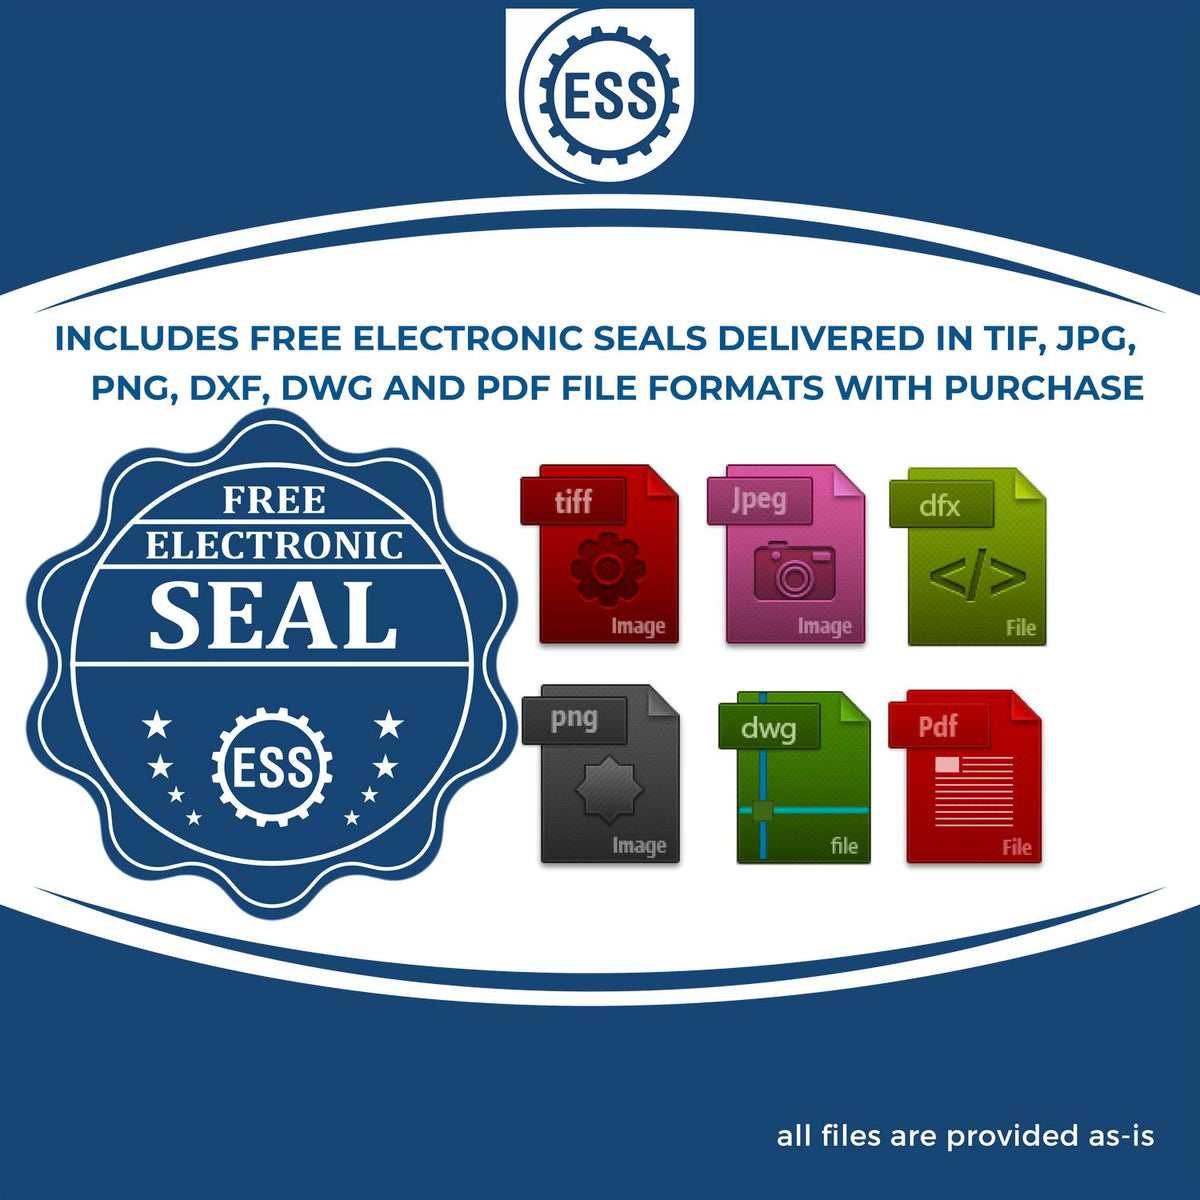 An infographic for the free electronic seal for the Premium MaxLight Pre-Inked Louisiana Geology Stamp illustrating the different file type icons such as DXF, DWG, TIF, JPG and PNG.